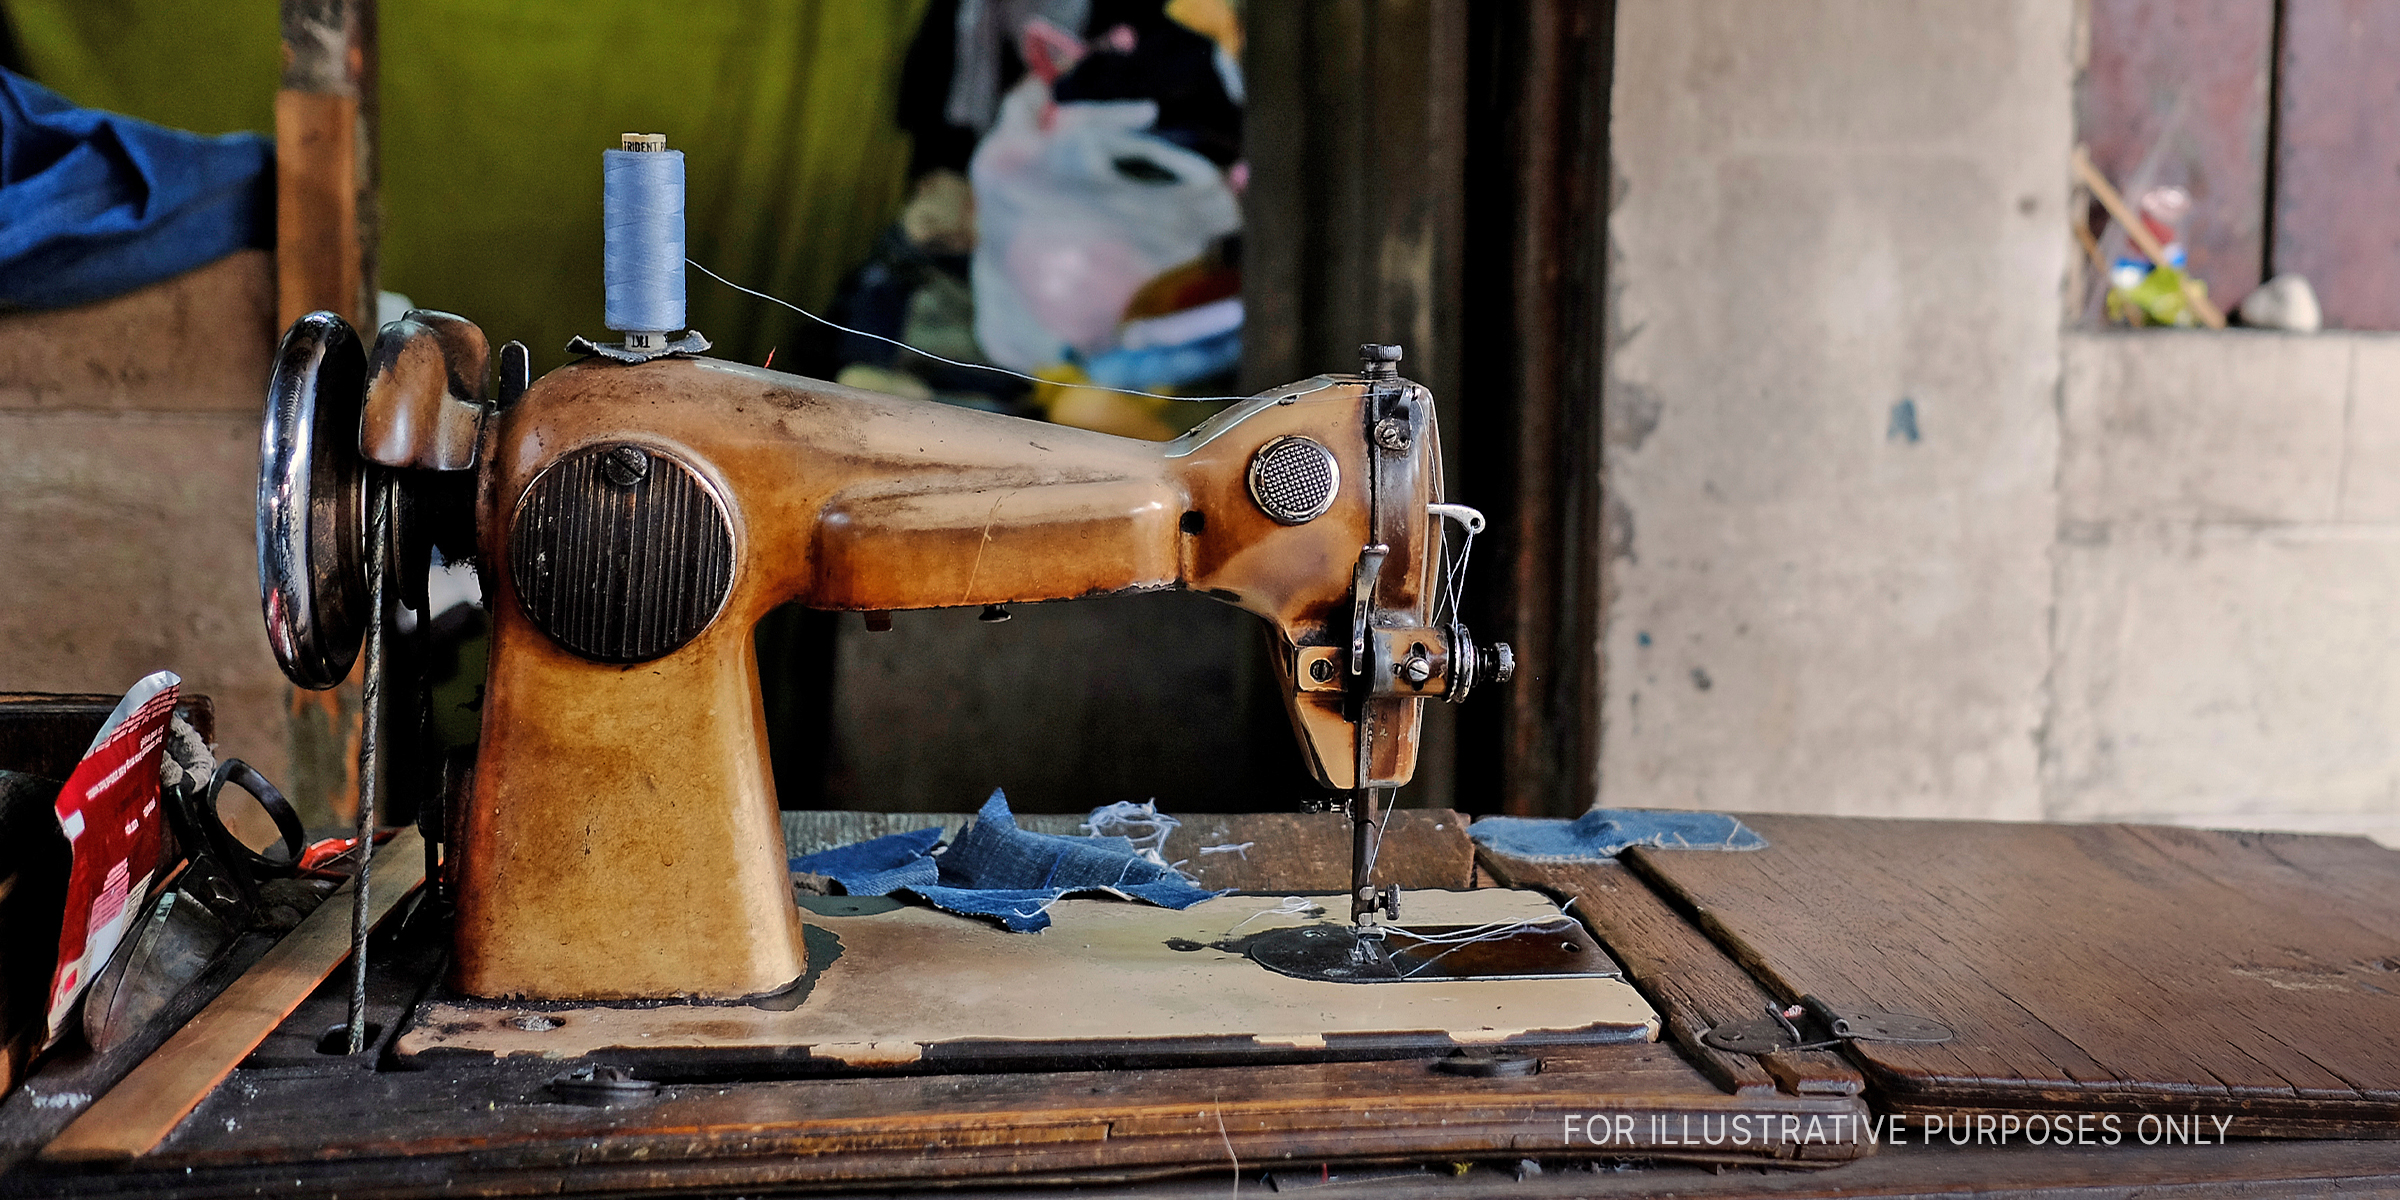 Old Sewing Machine. | Source: Getty Images